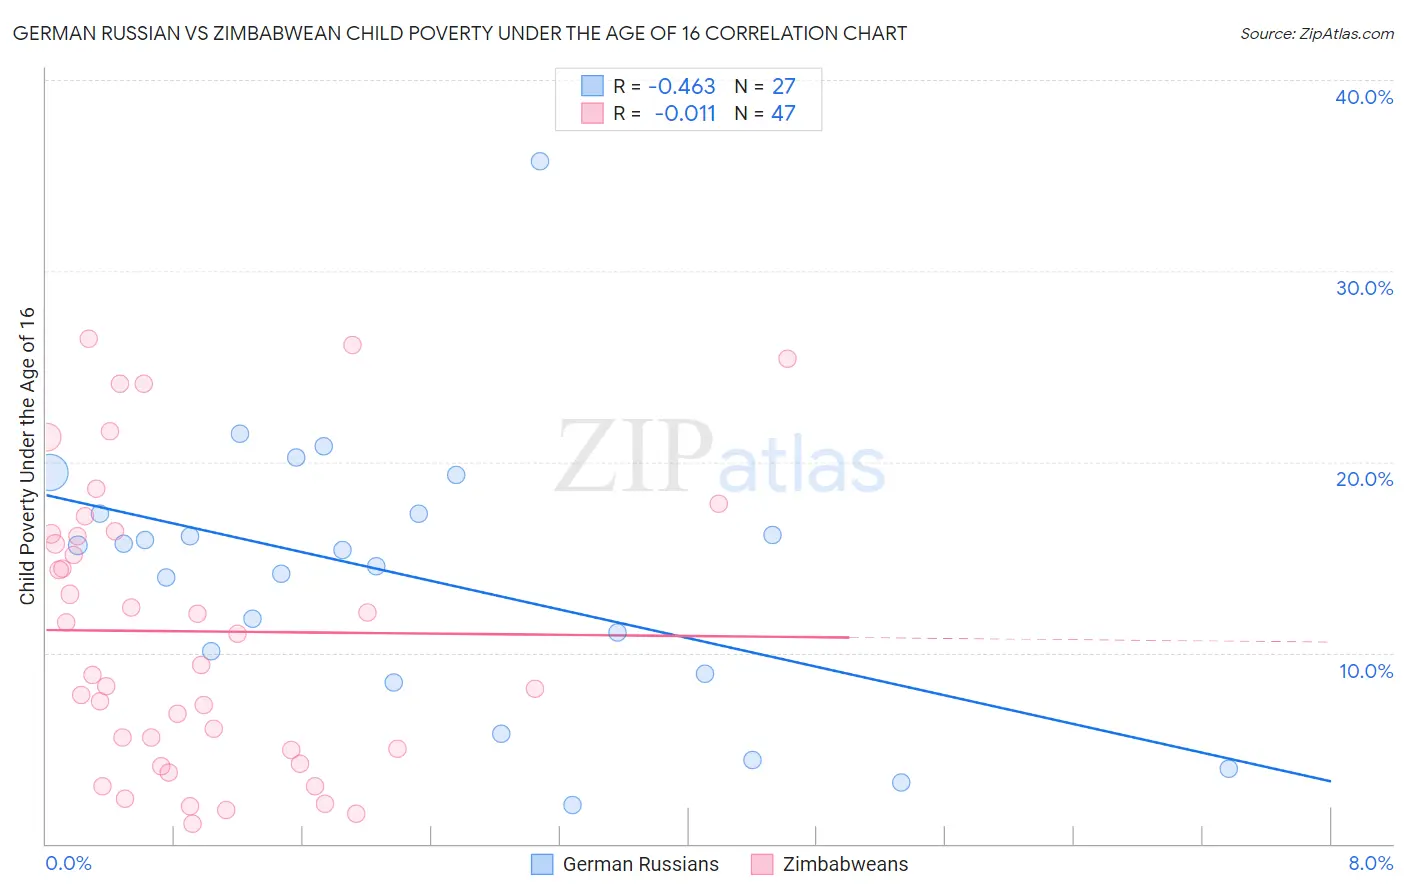 German Russian vs Zimbabwean Child Poverty Under the Age of 16